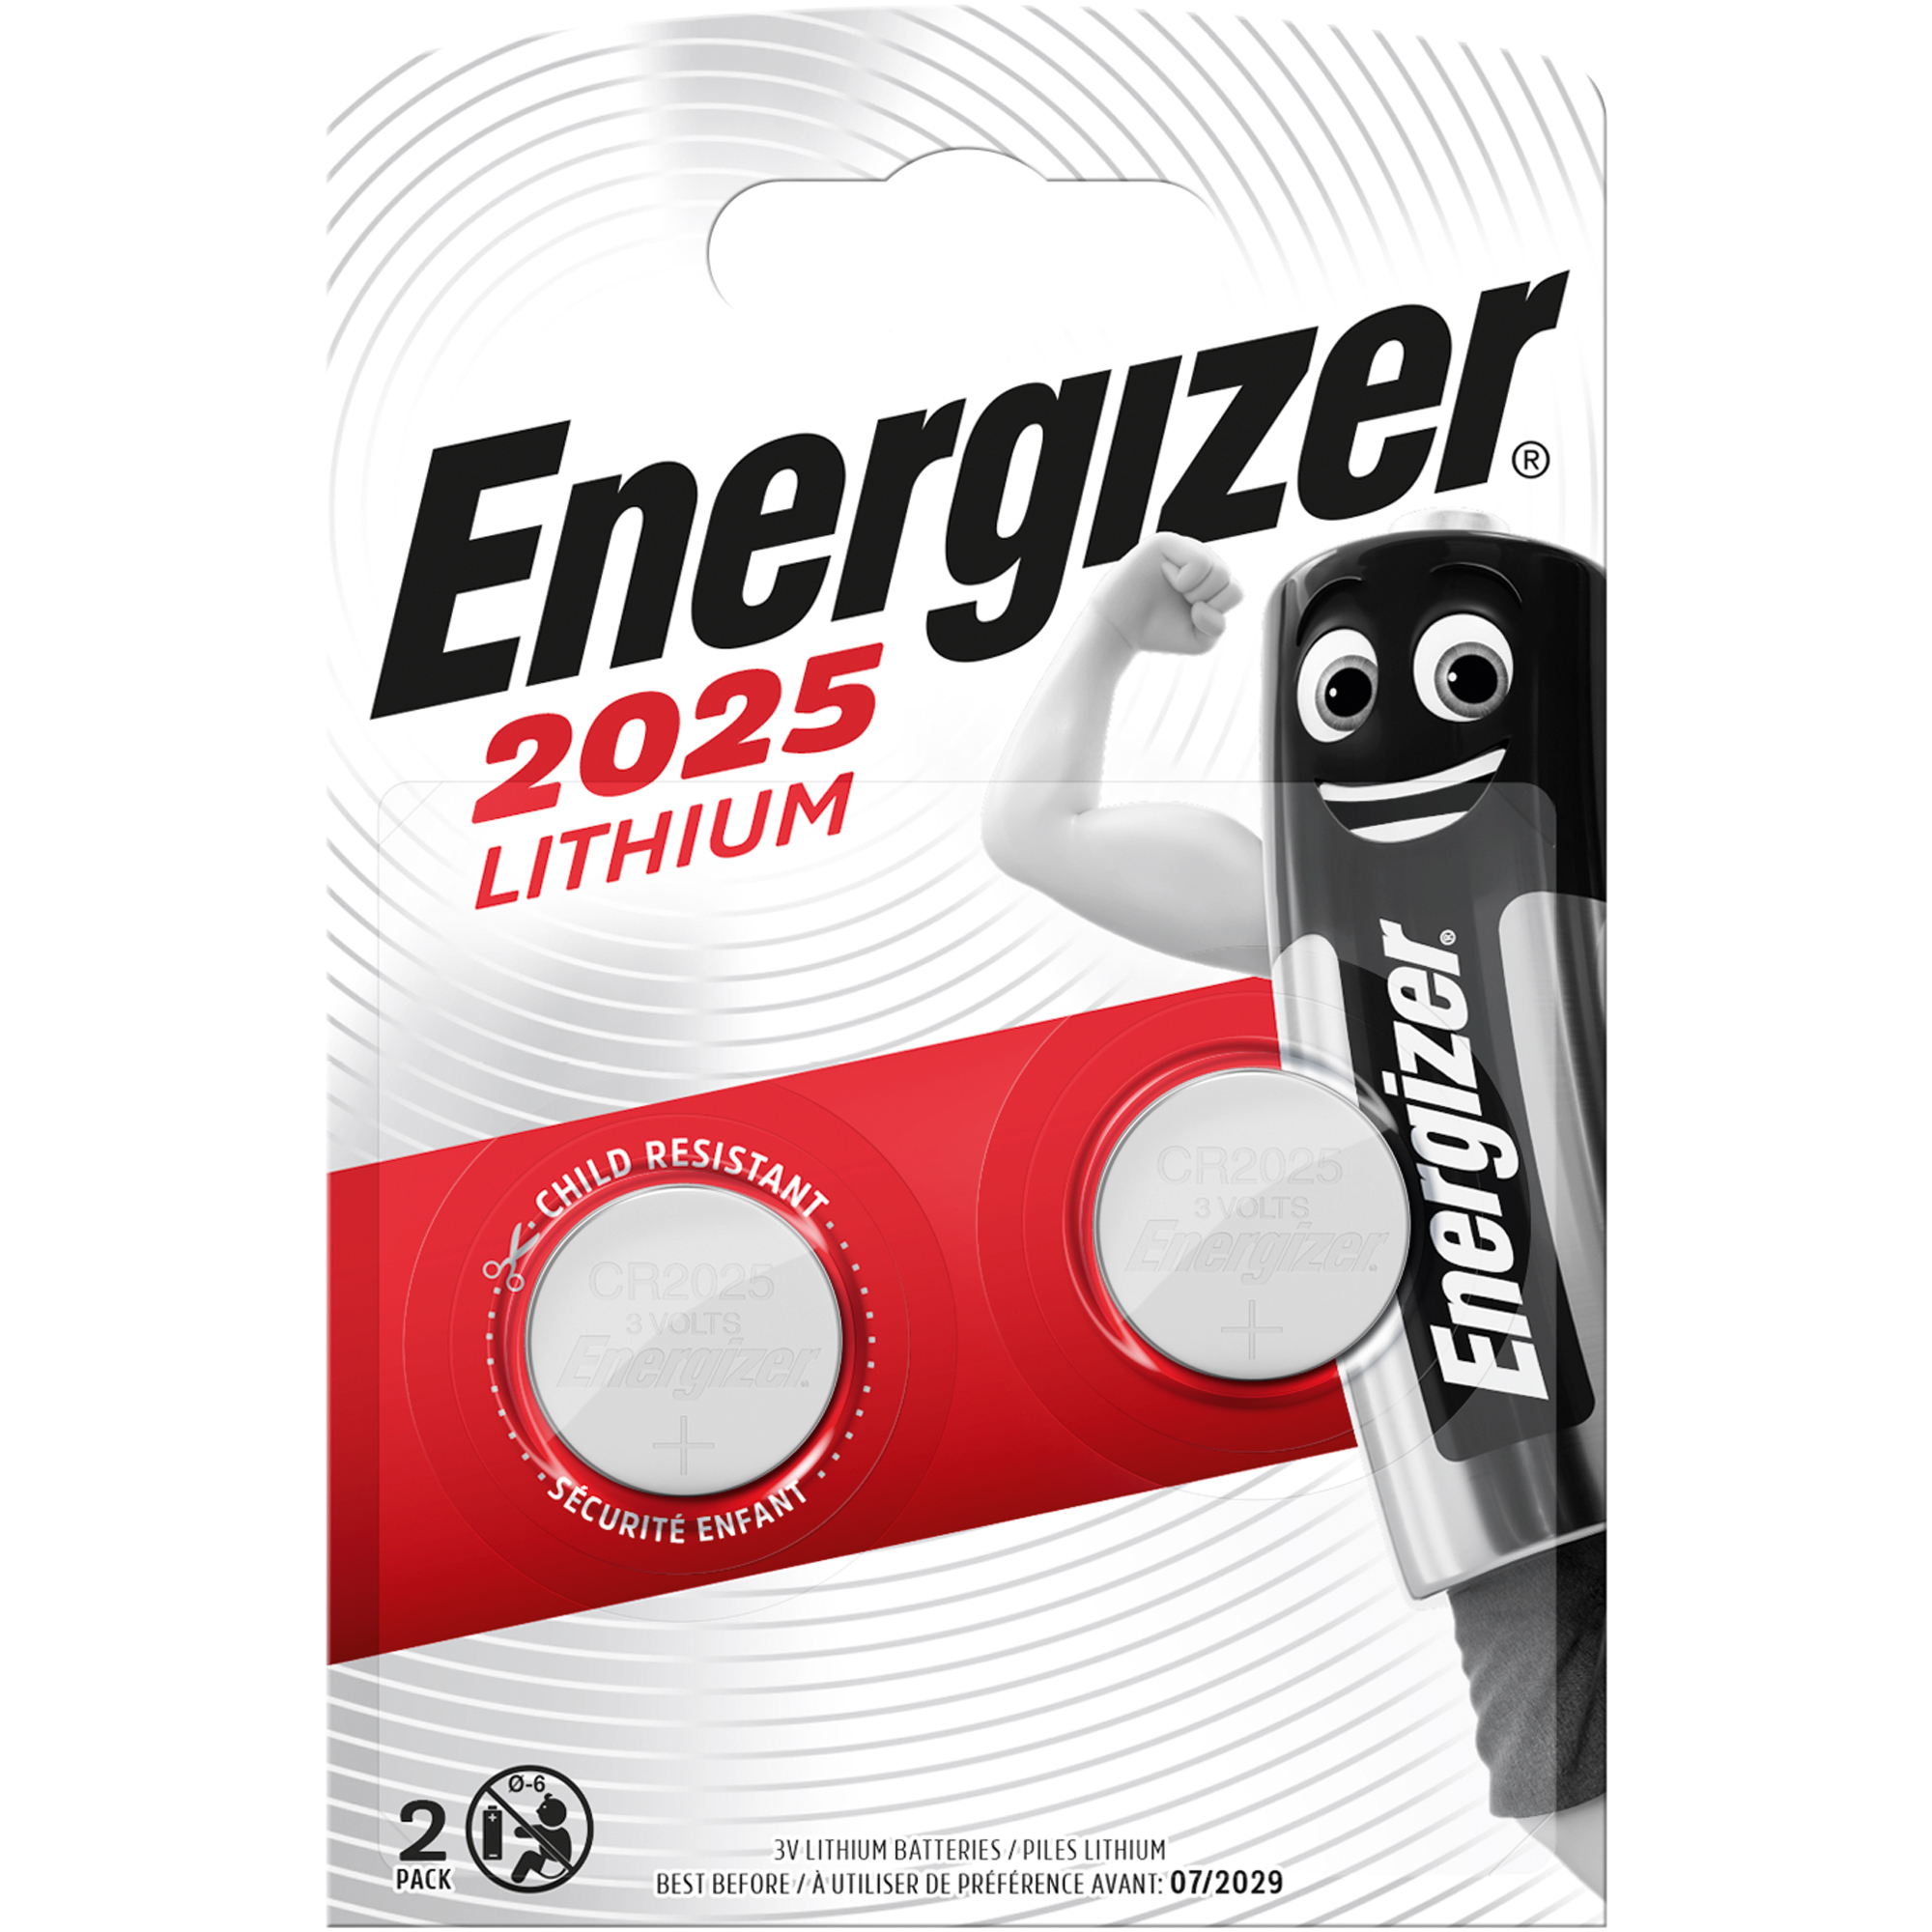 Energizer Knopfzelle CR 2025 E301021502 Lithium 2 St.Pack.